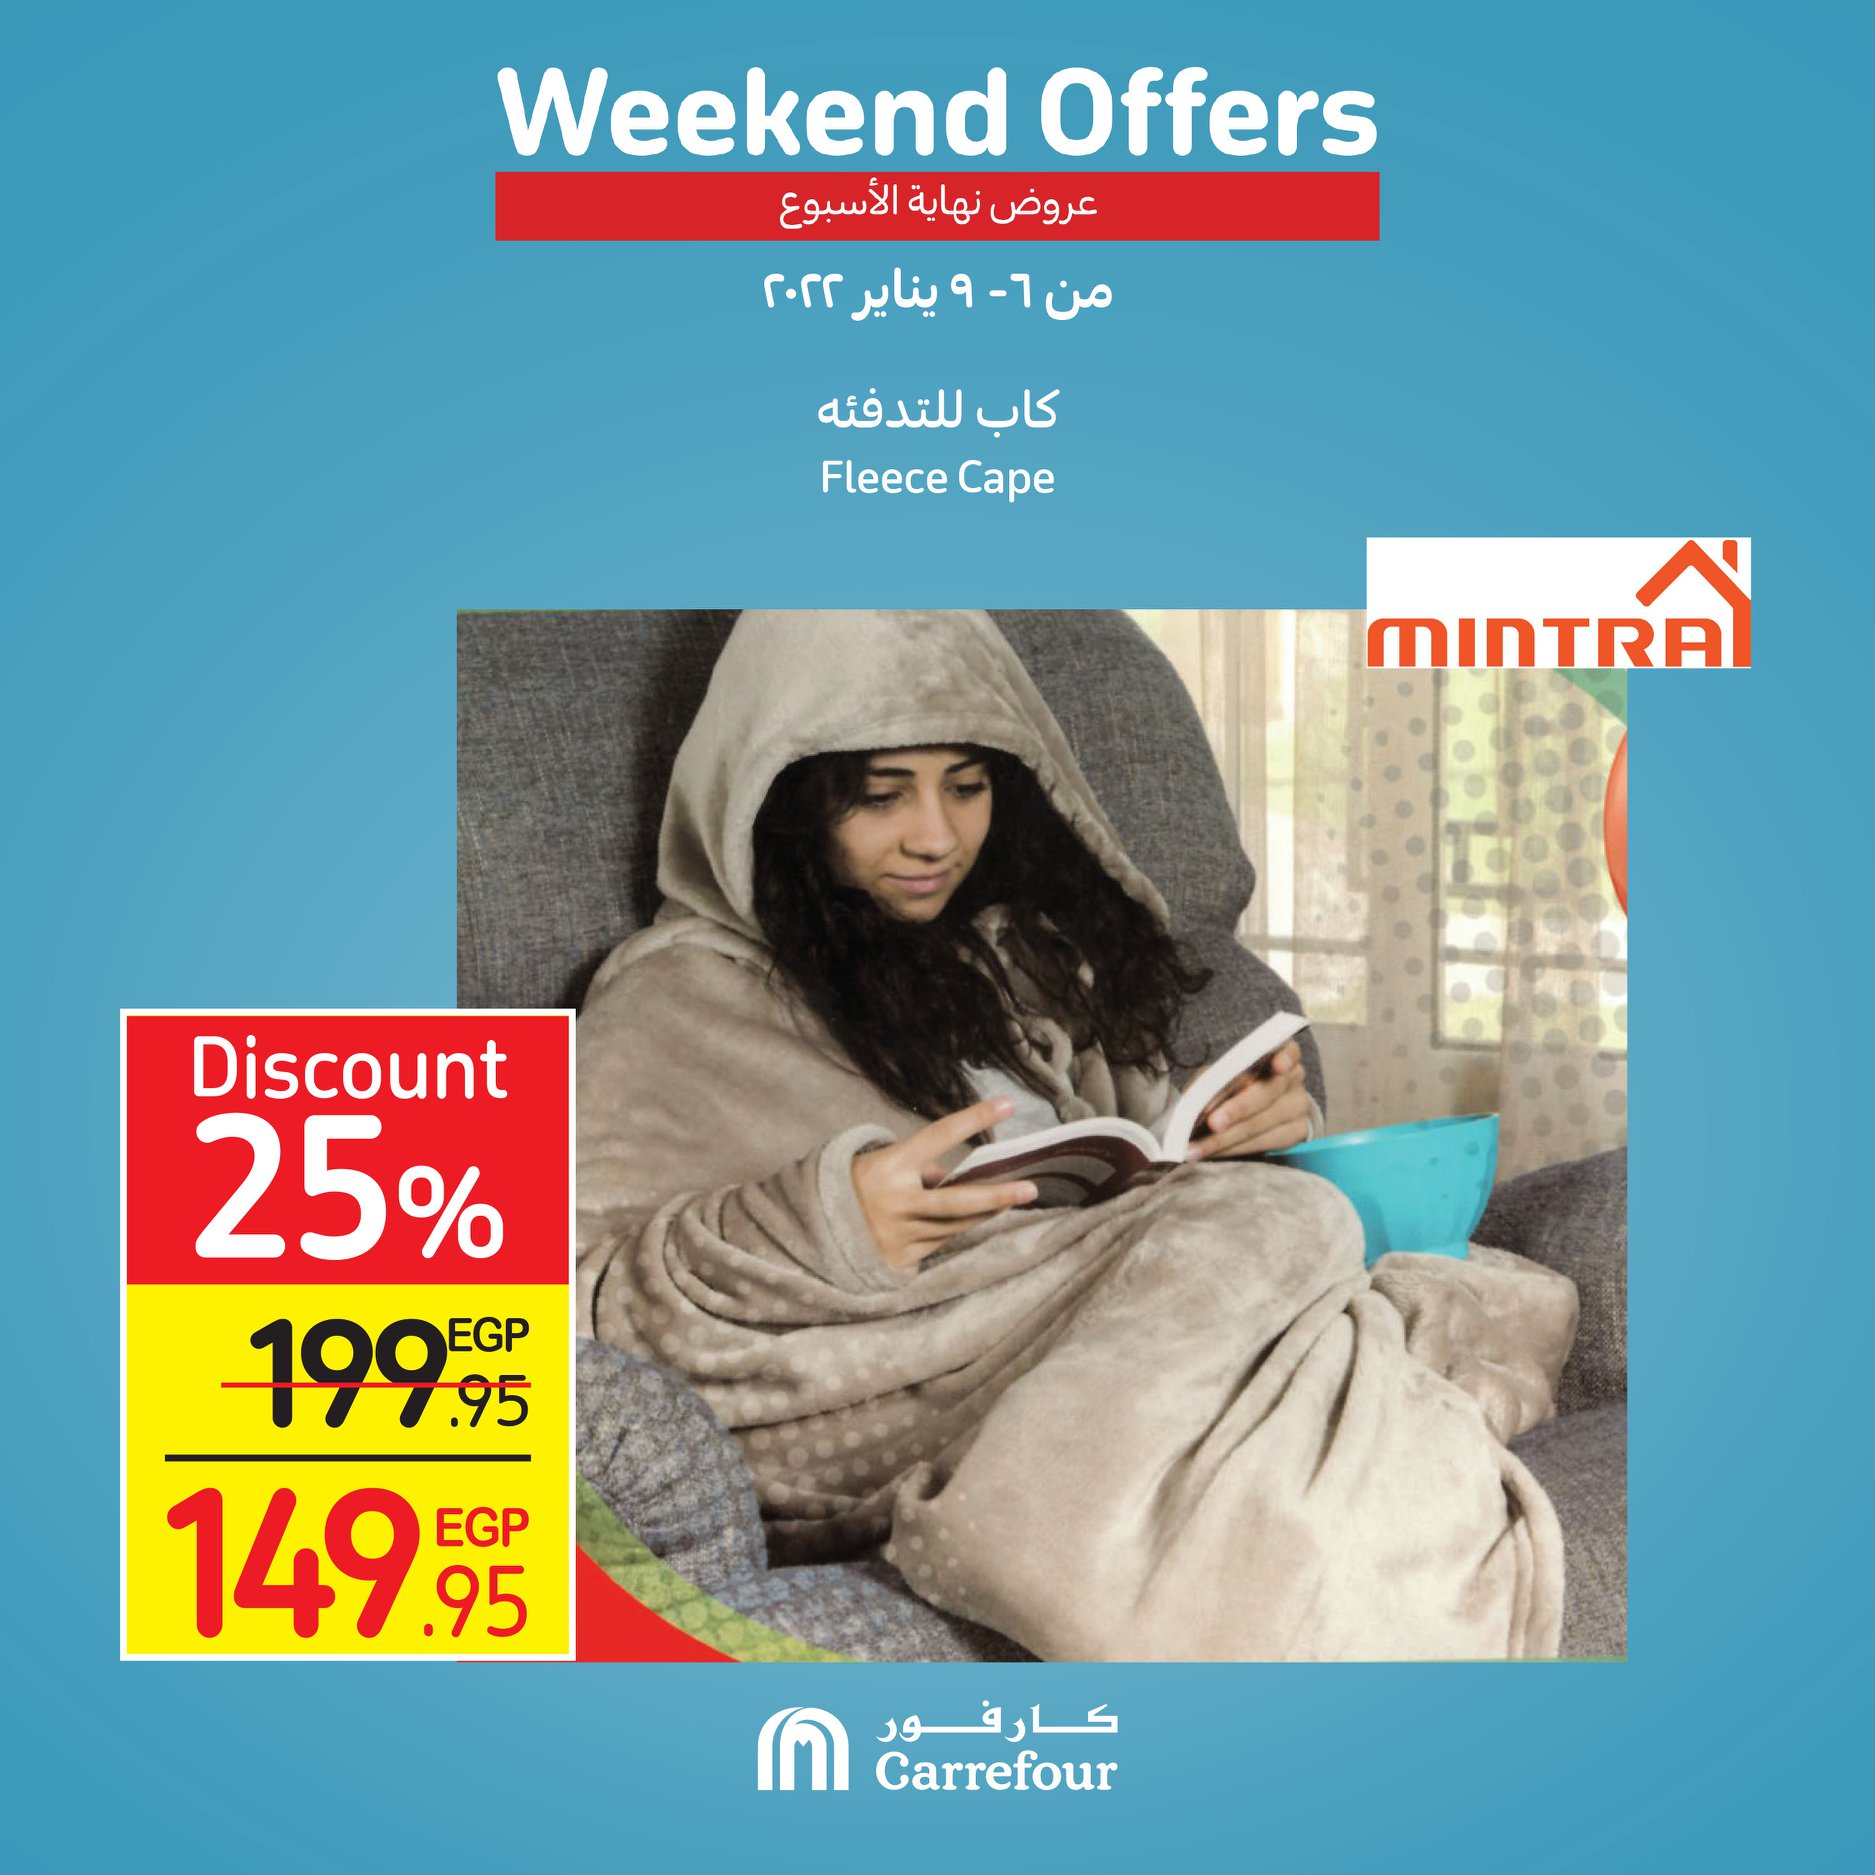 Now, the strongest Carrefour offers and surprises, half-price discounts, at Weekend until January 16th, 37